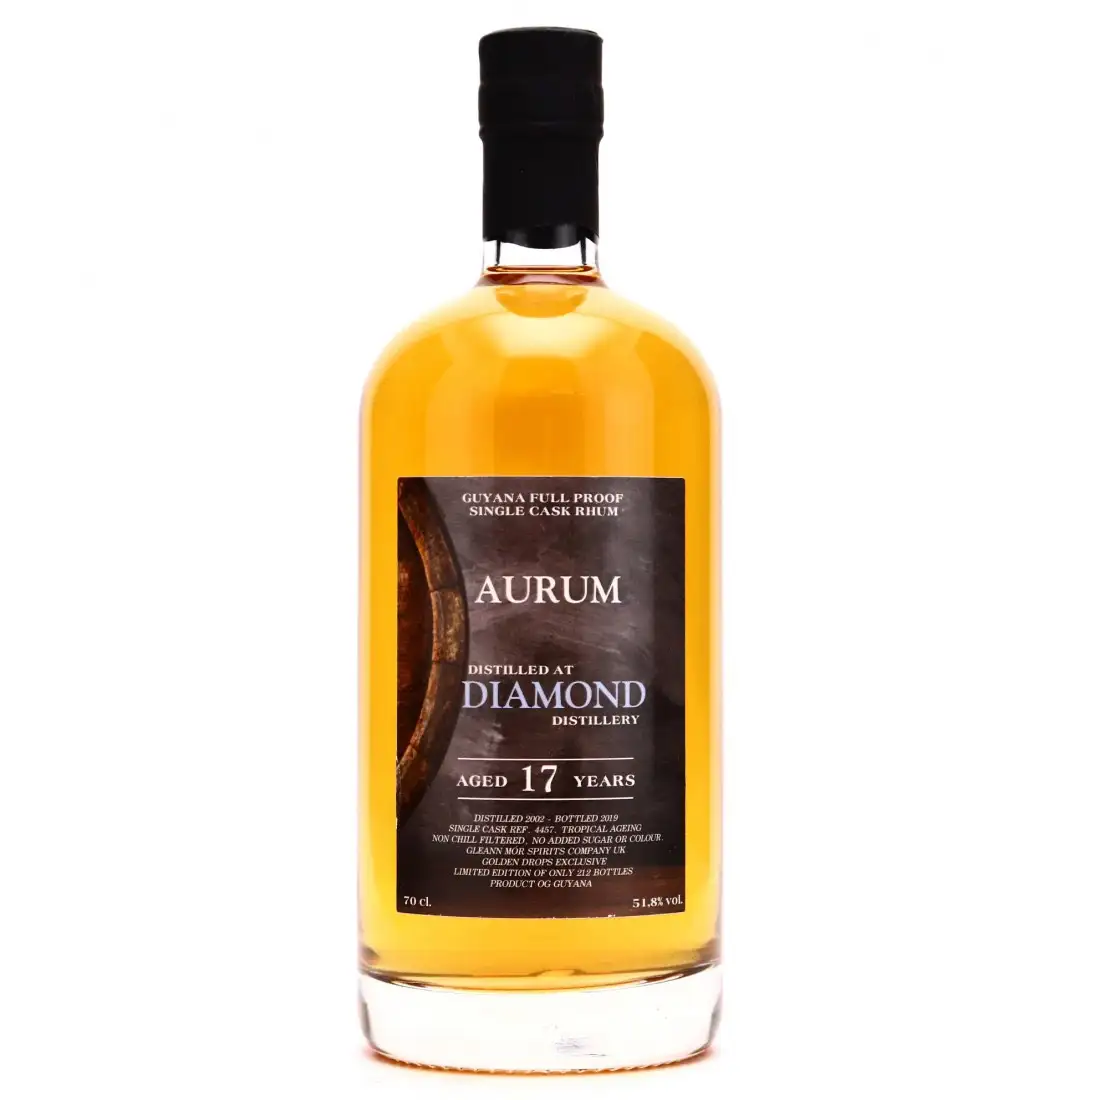 Image of the front of the bottle of the rum Aurum No. 4